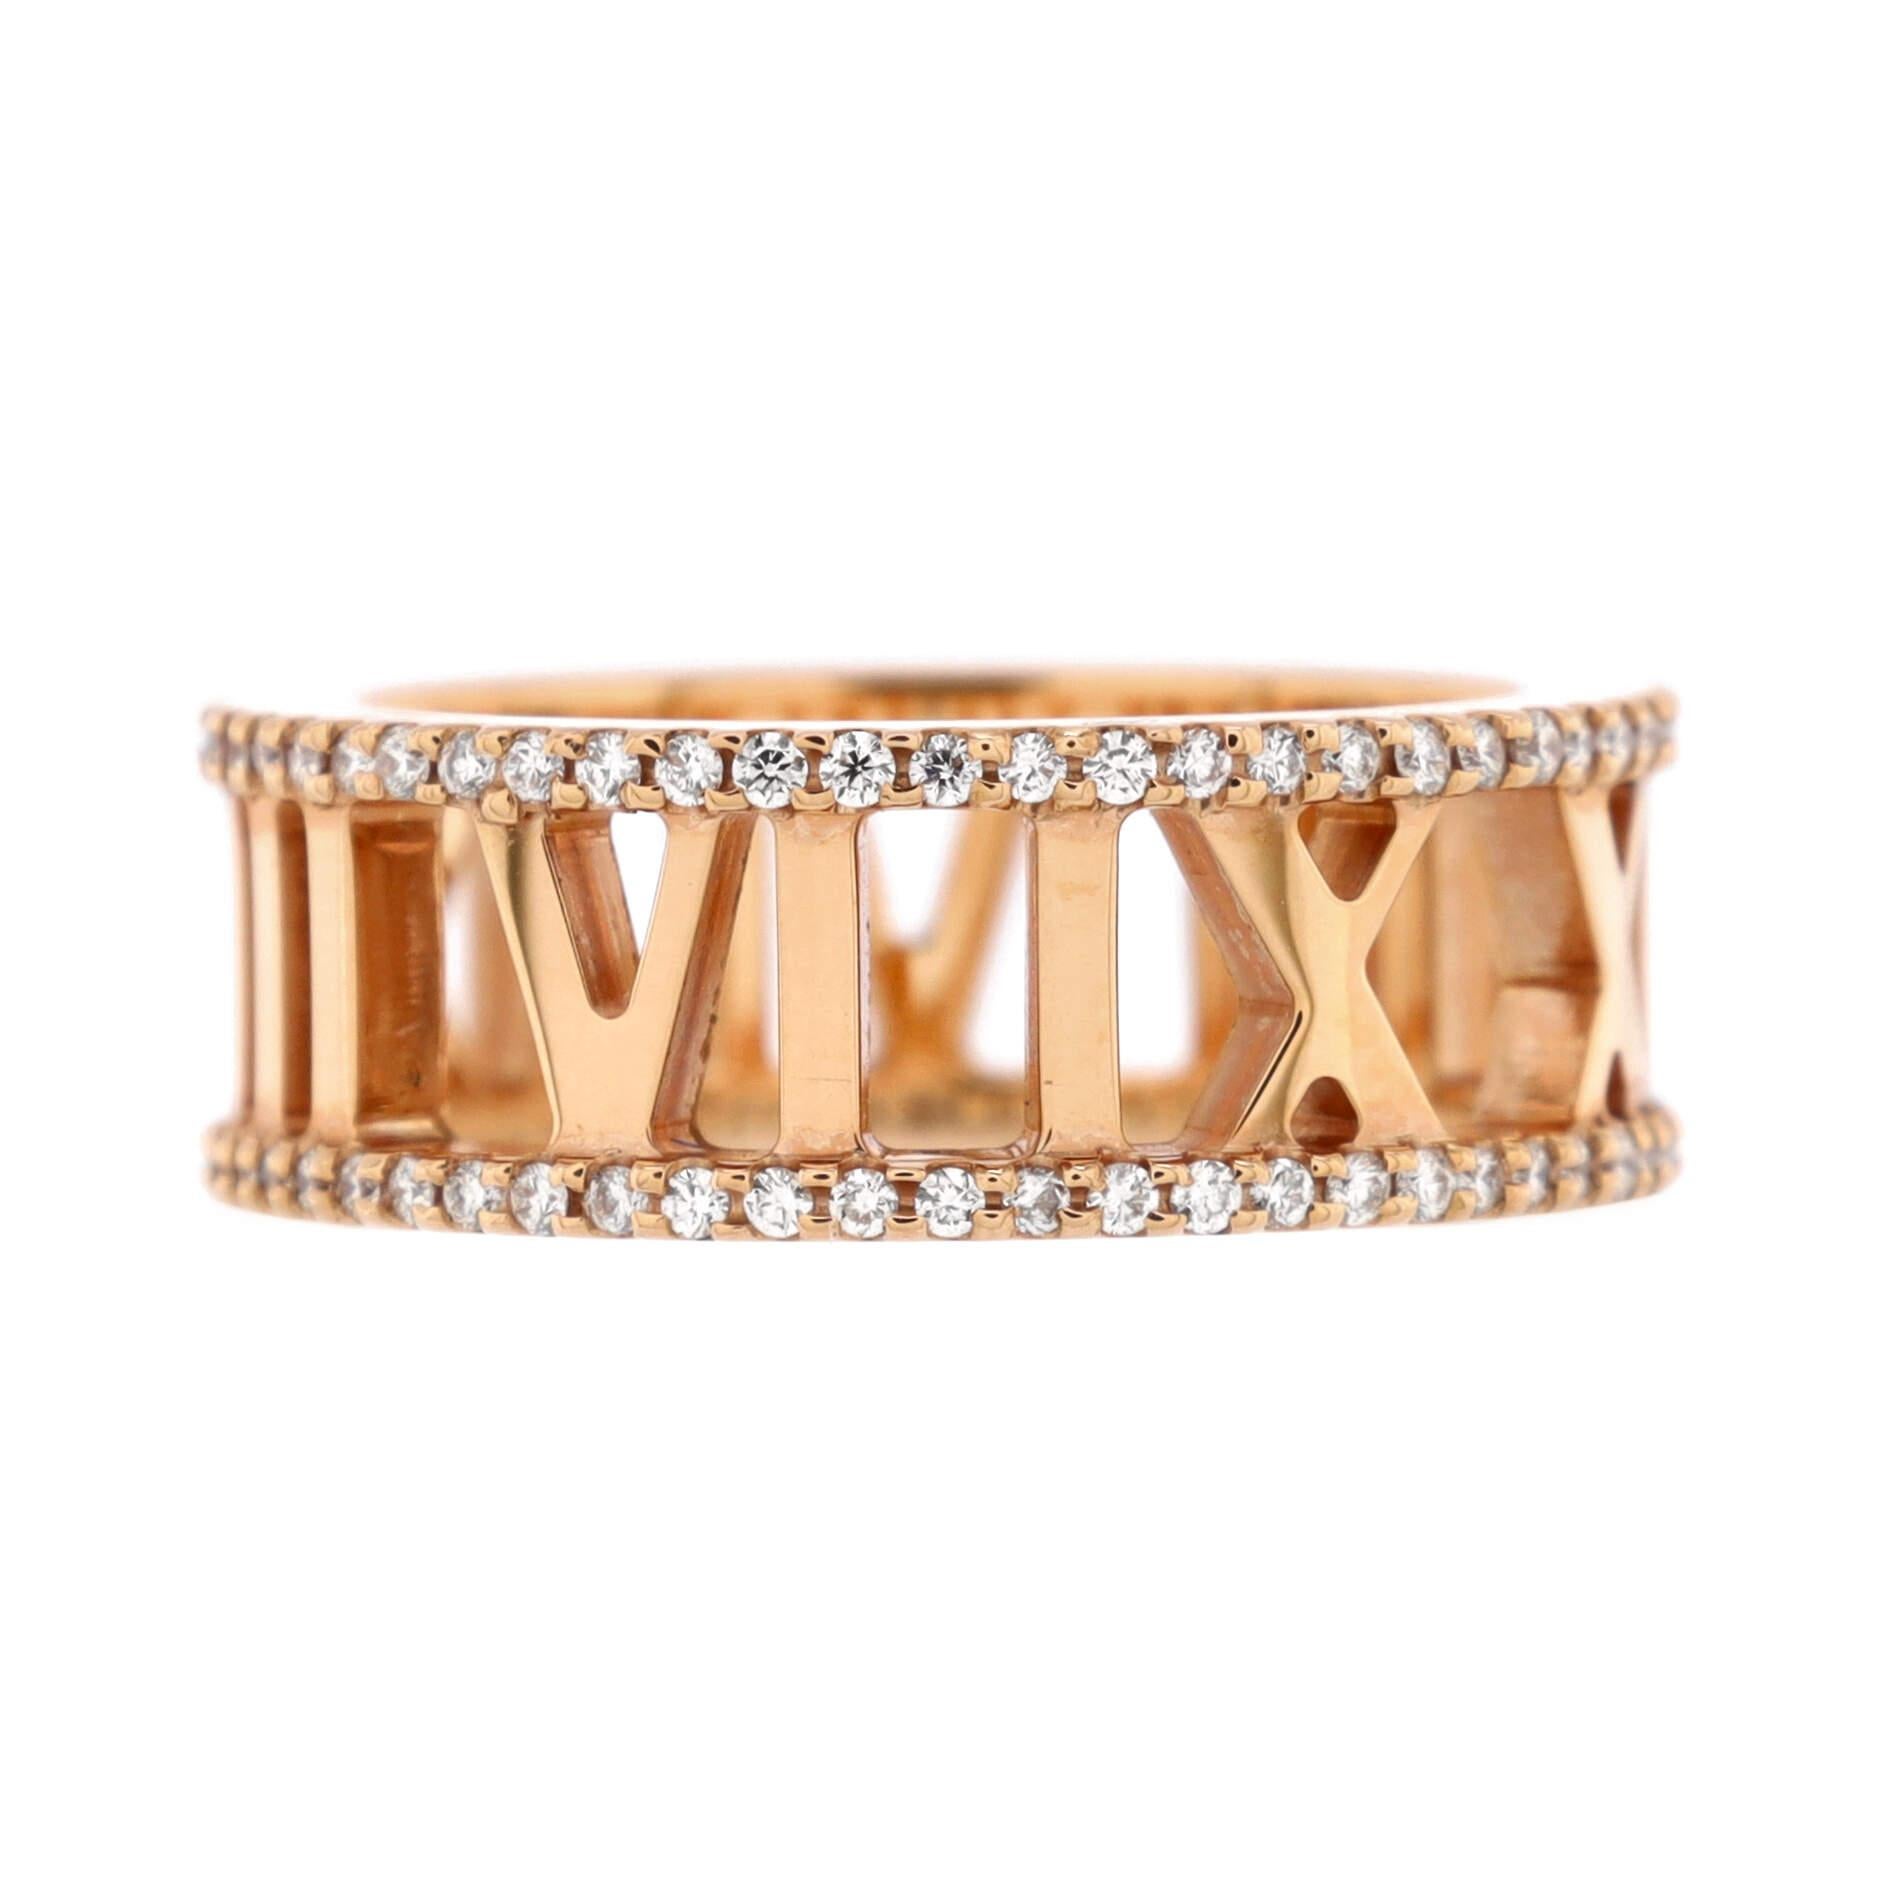 Condition: Great. Minor wear throughout.
Accessories:
Measurements: Size: 4.75 - 49, Width: 7 mm
Designer: Tiffany & Co.
Model: Atlas Open Ring 18K Rose Gold with Diamond 7mm
Exterior Color: Rose Gold
Item Number: 224637/6